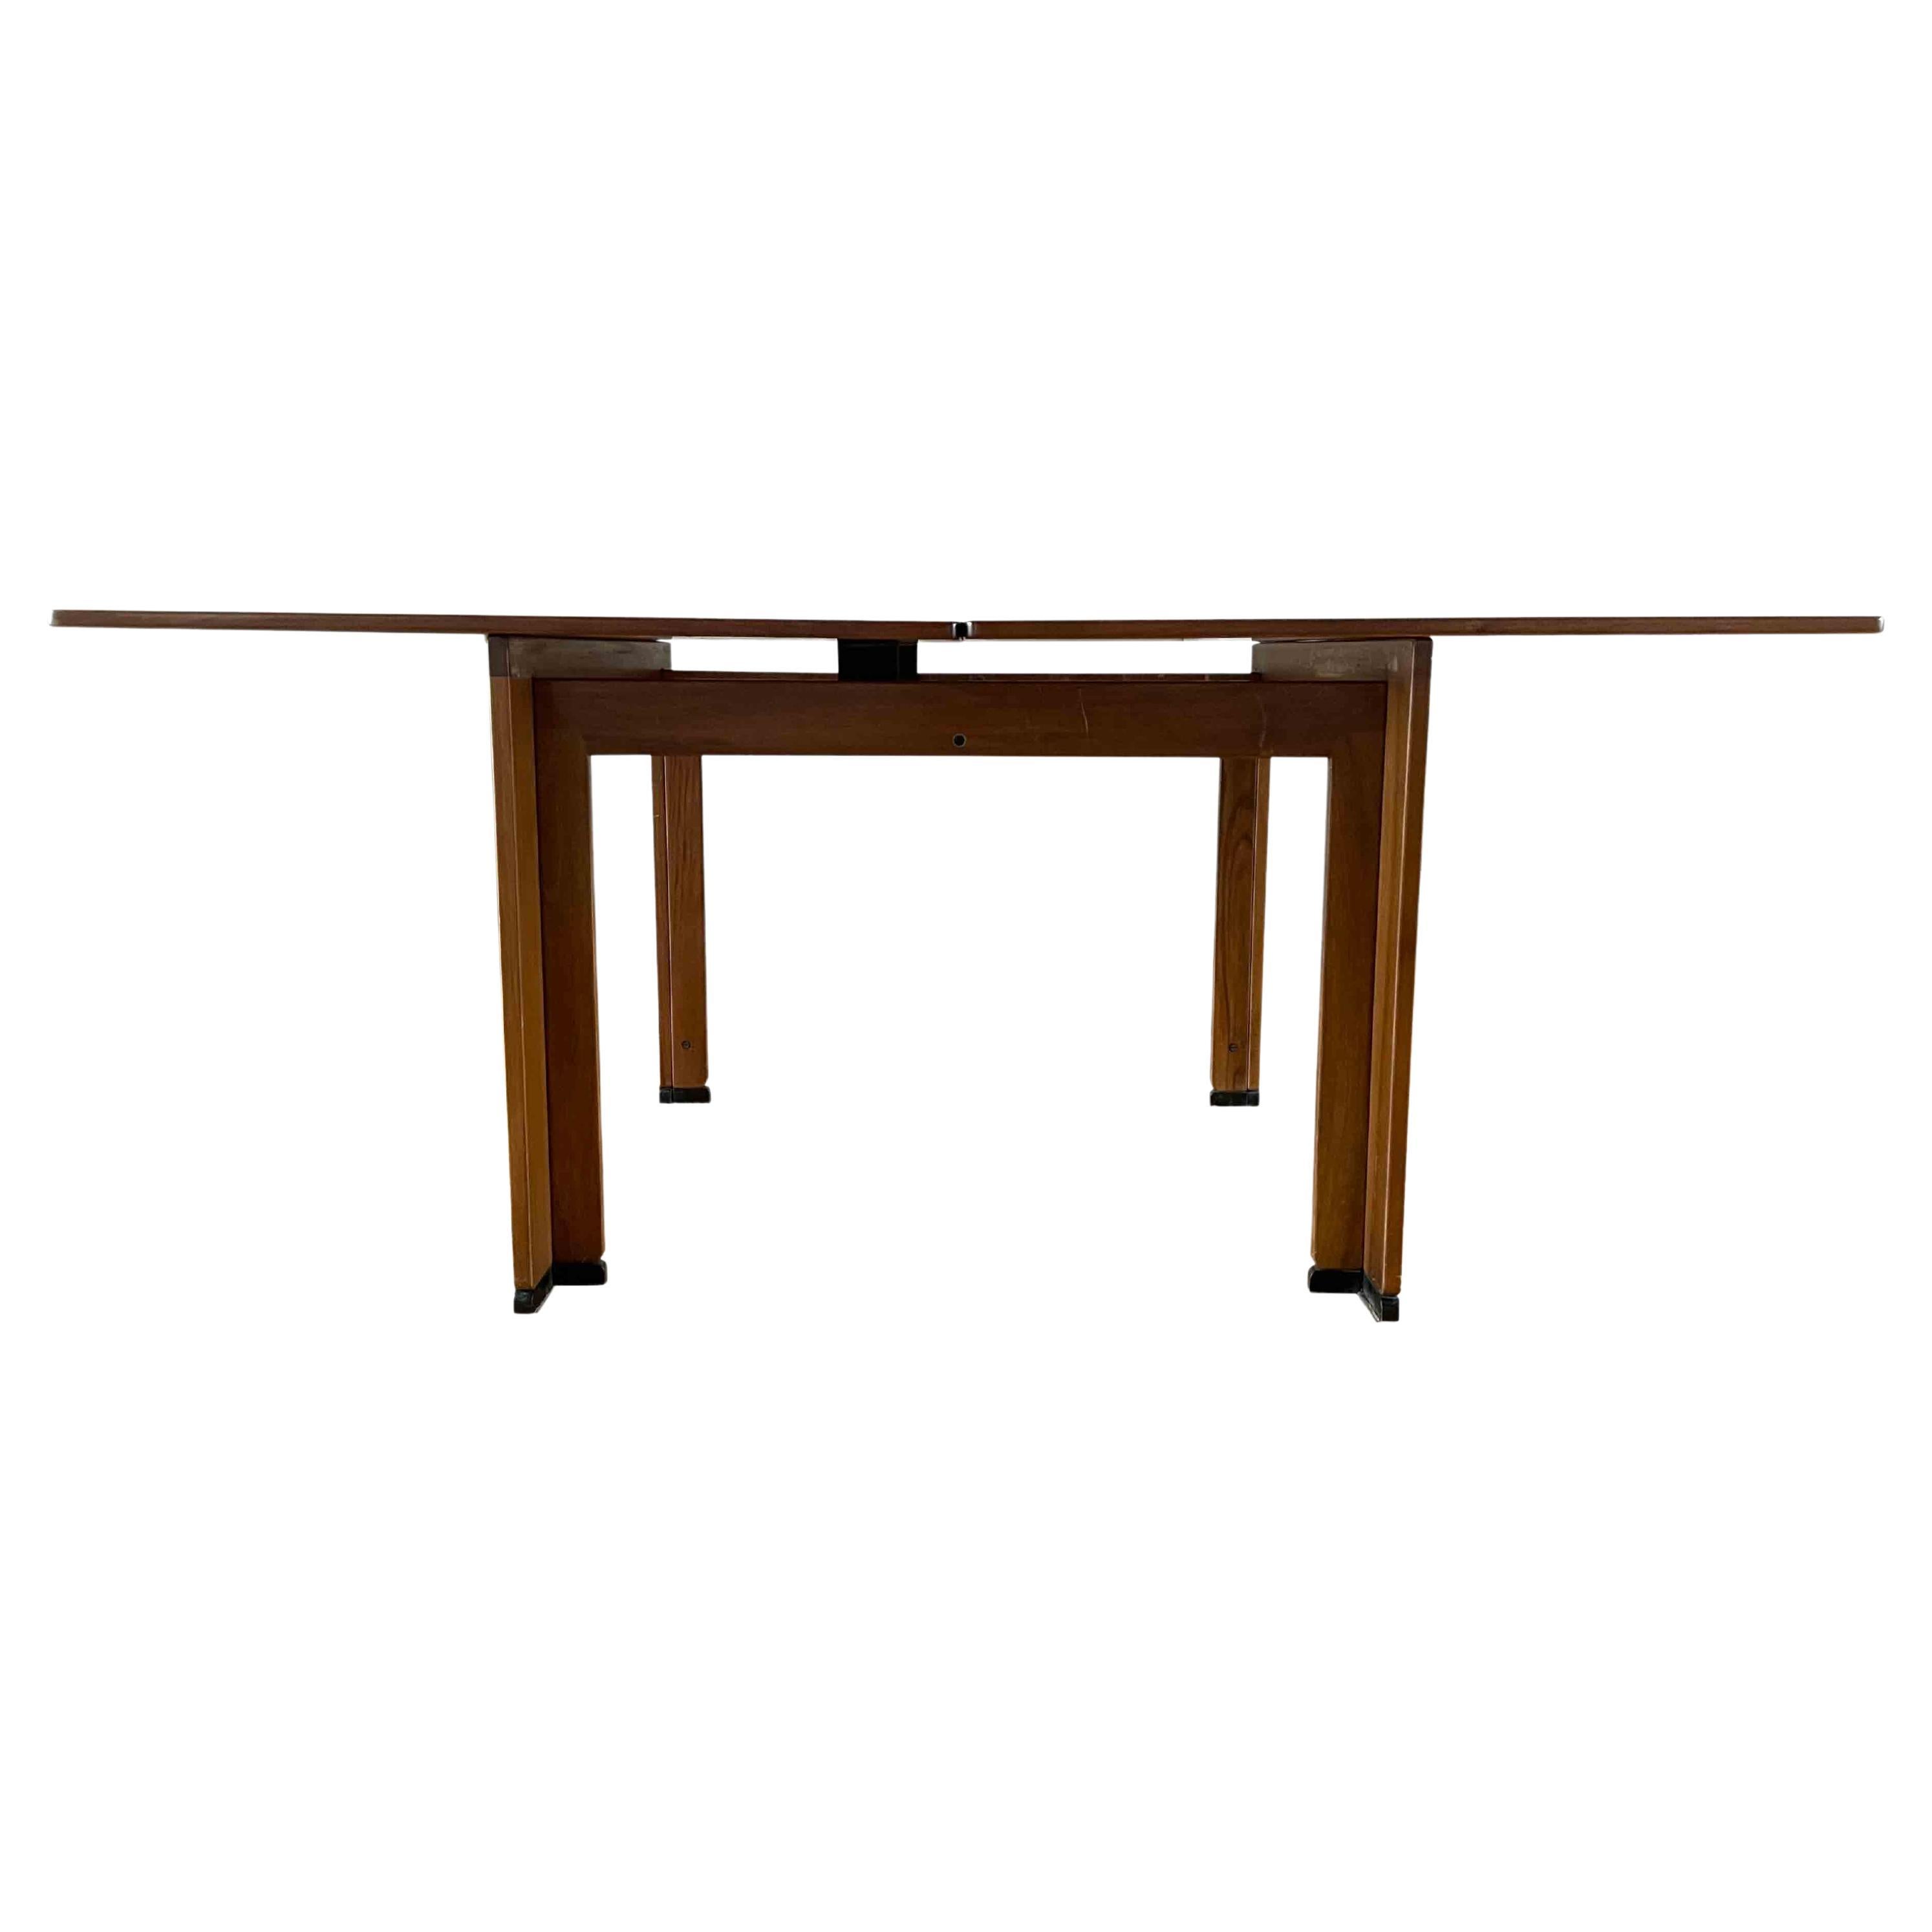 Afra & Tobia Scarpa Midcentury “778” Extensible Dining Table for Cassina, 1967